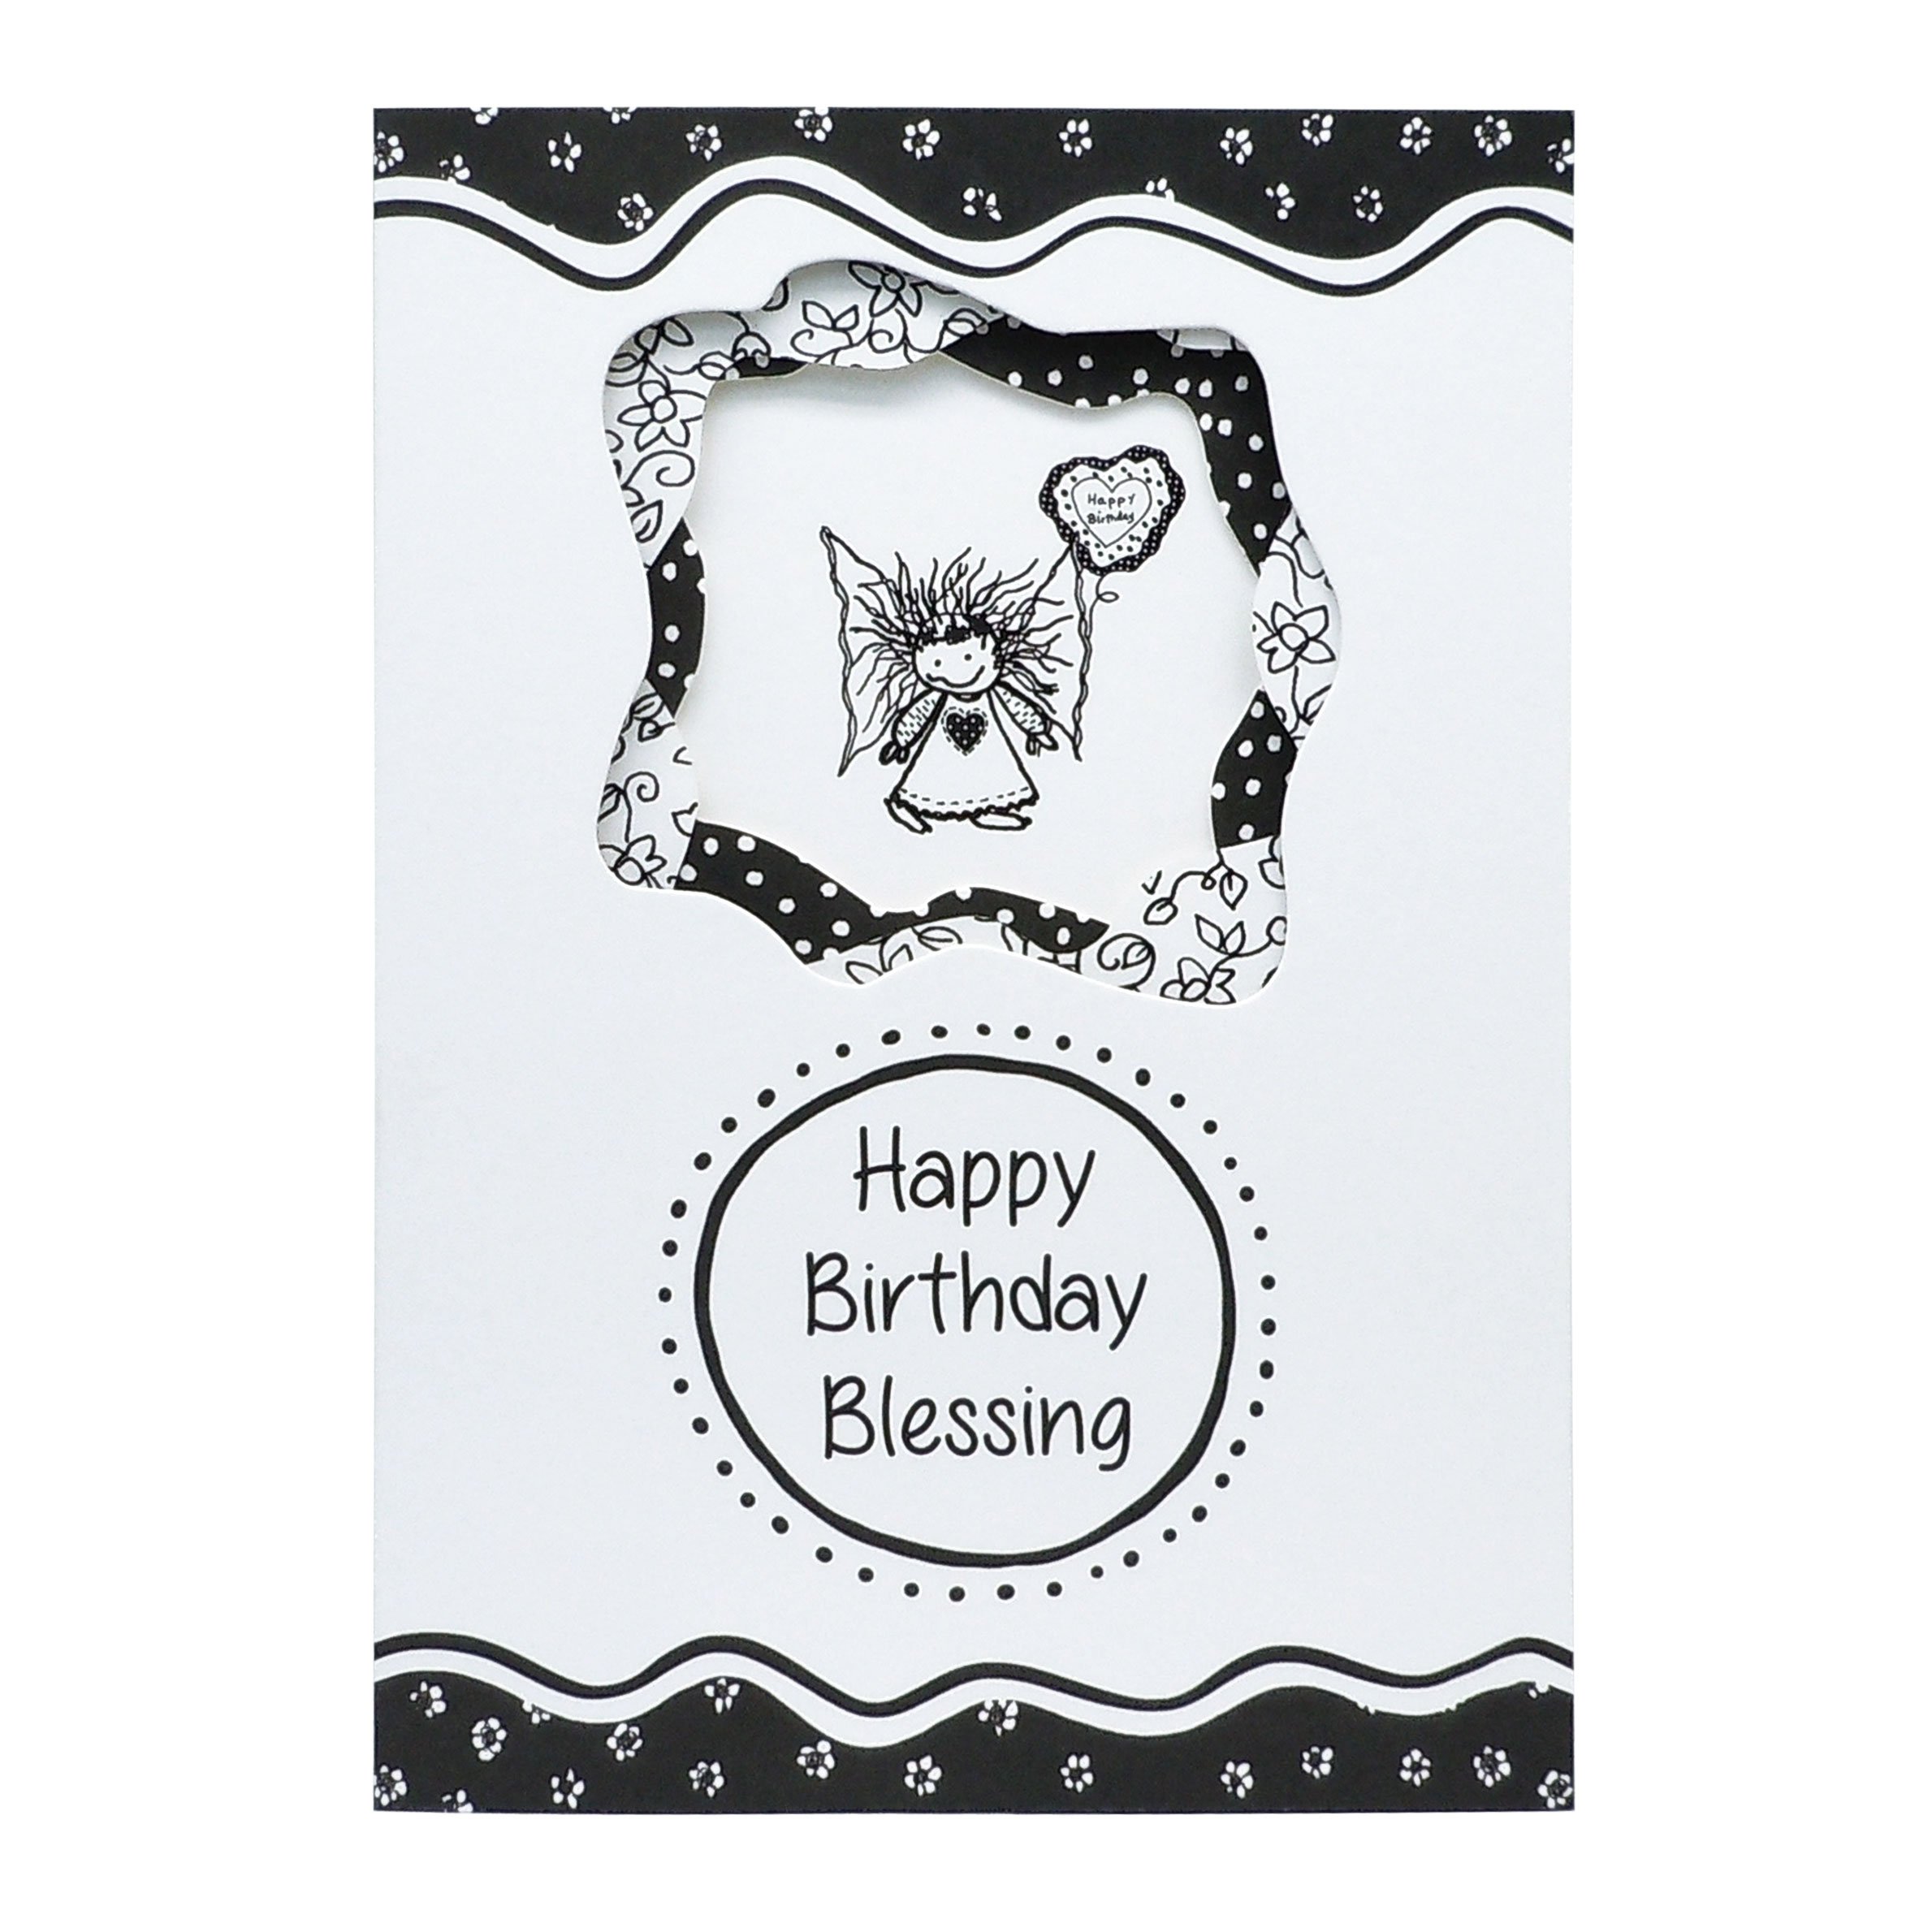 “Happy Birthday Blessing” by Marci — Blue Mountain Arts